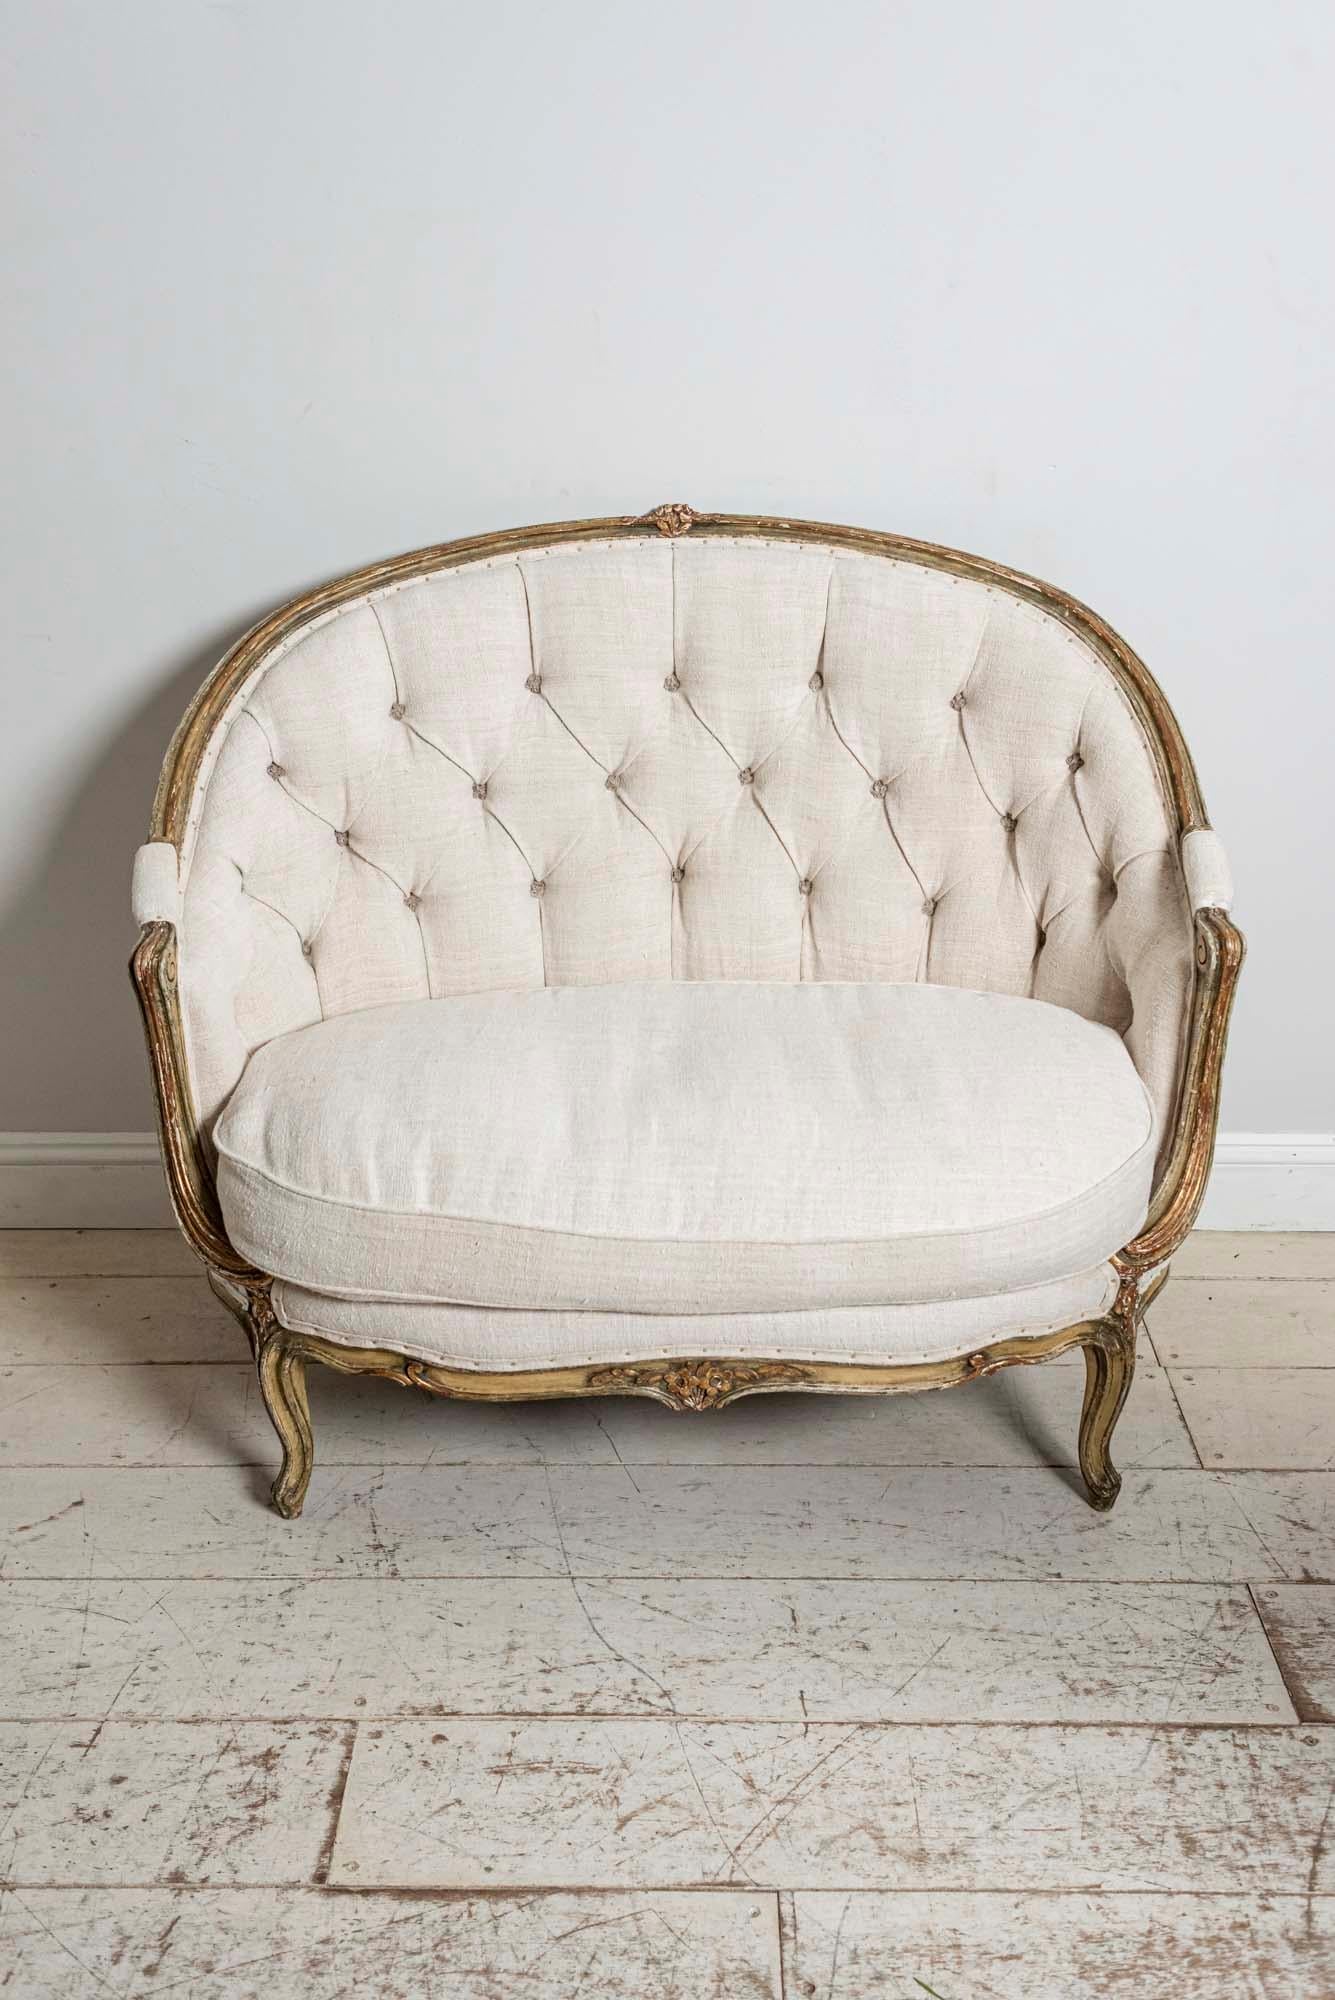 A French 19th century button-backed two seater curved sofa with traces of green and gilt paint to the wooden frame. This wonderful compact sofa features scrolls down the sides and has carved detail of leaves and flowers at the front. It has been